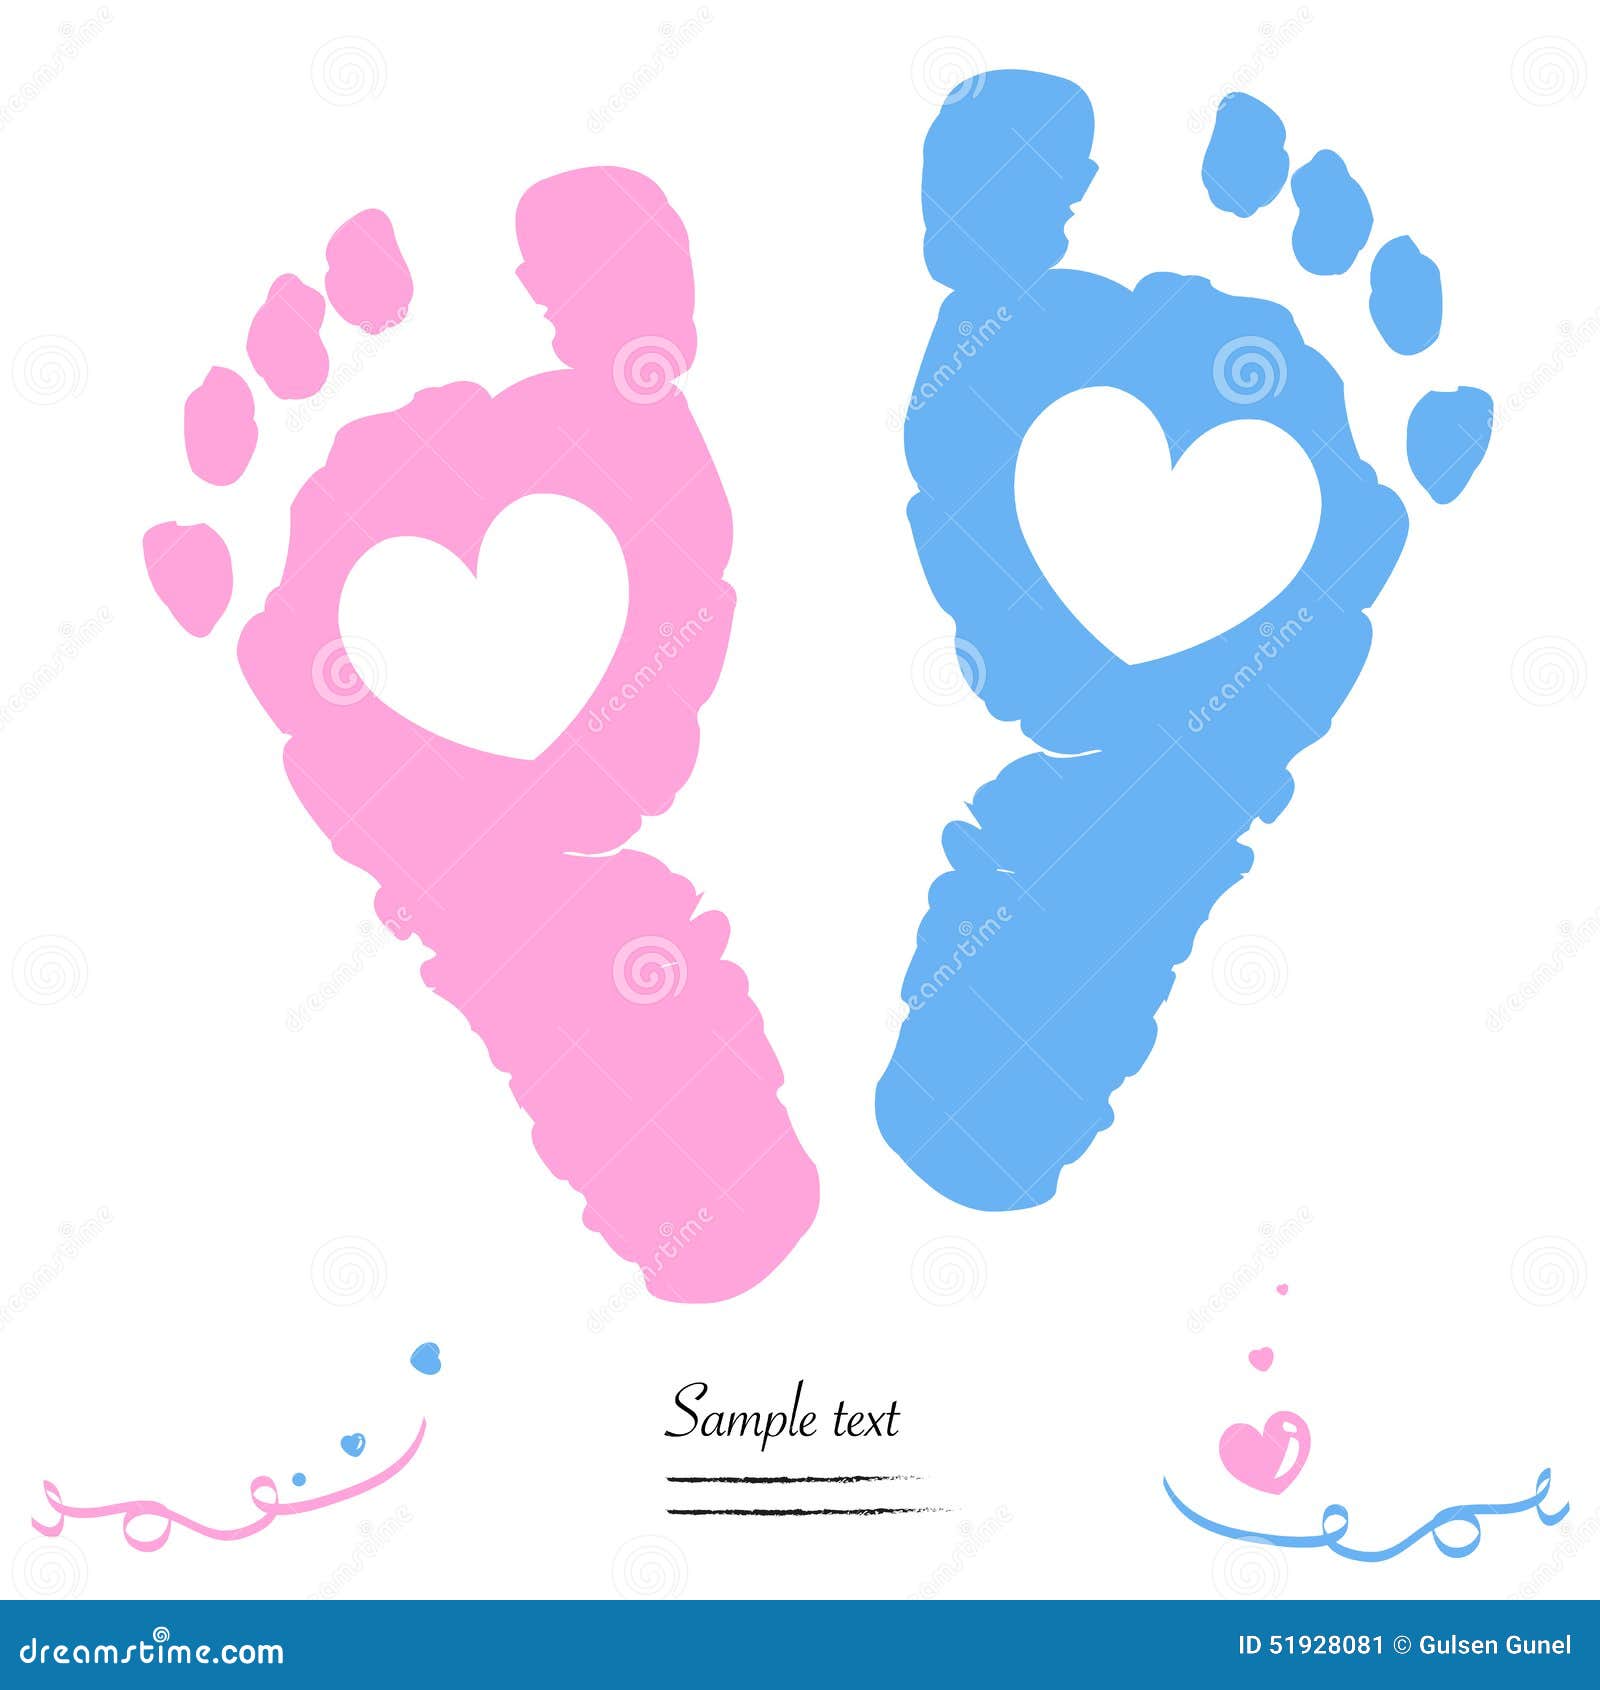 clipart baby cards - photo #22